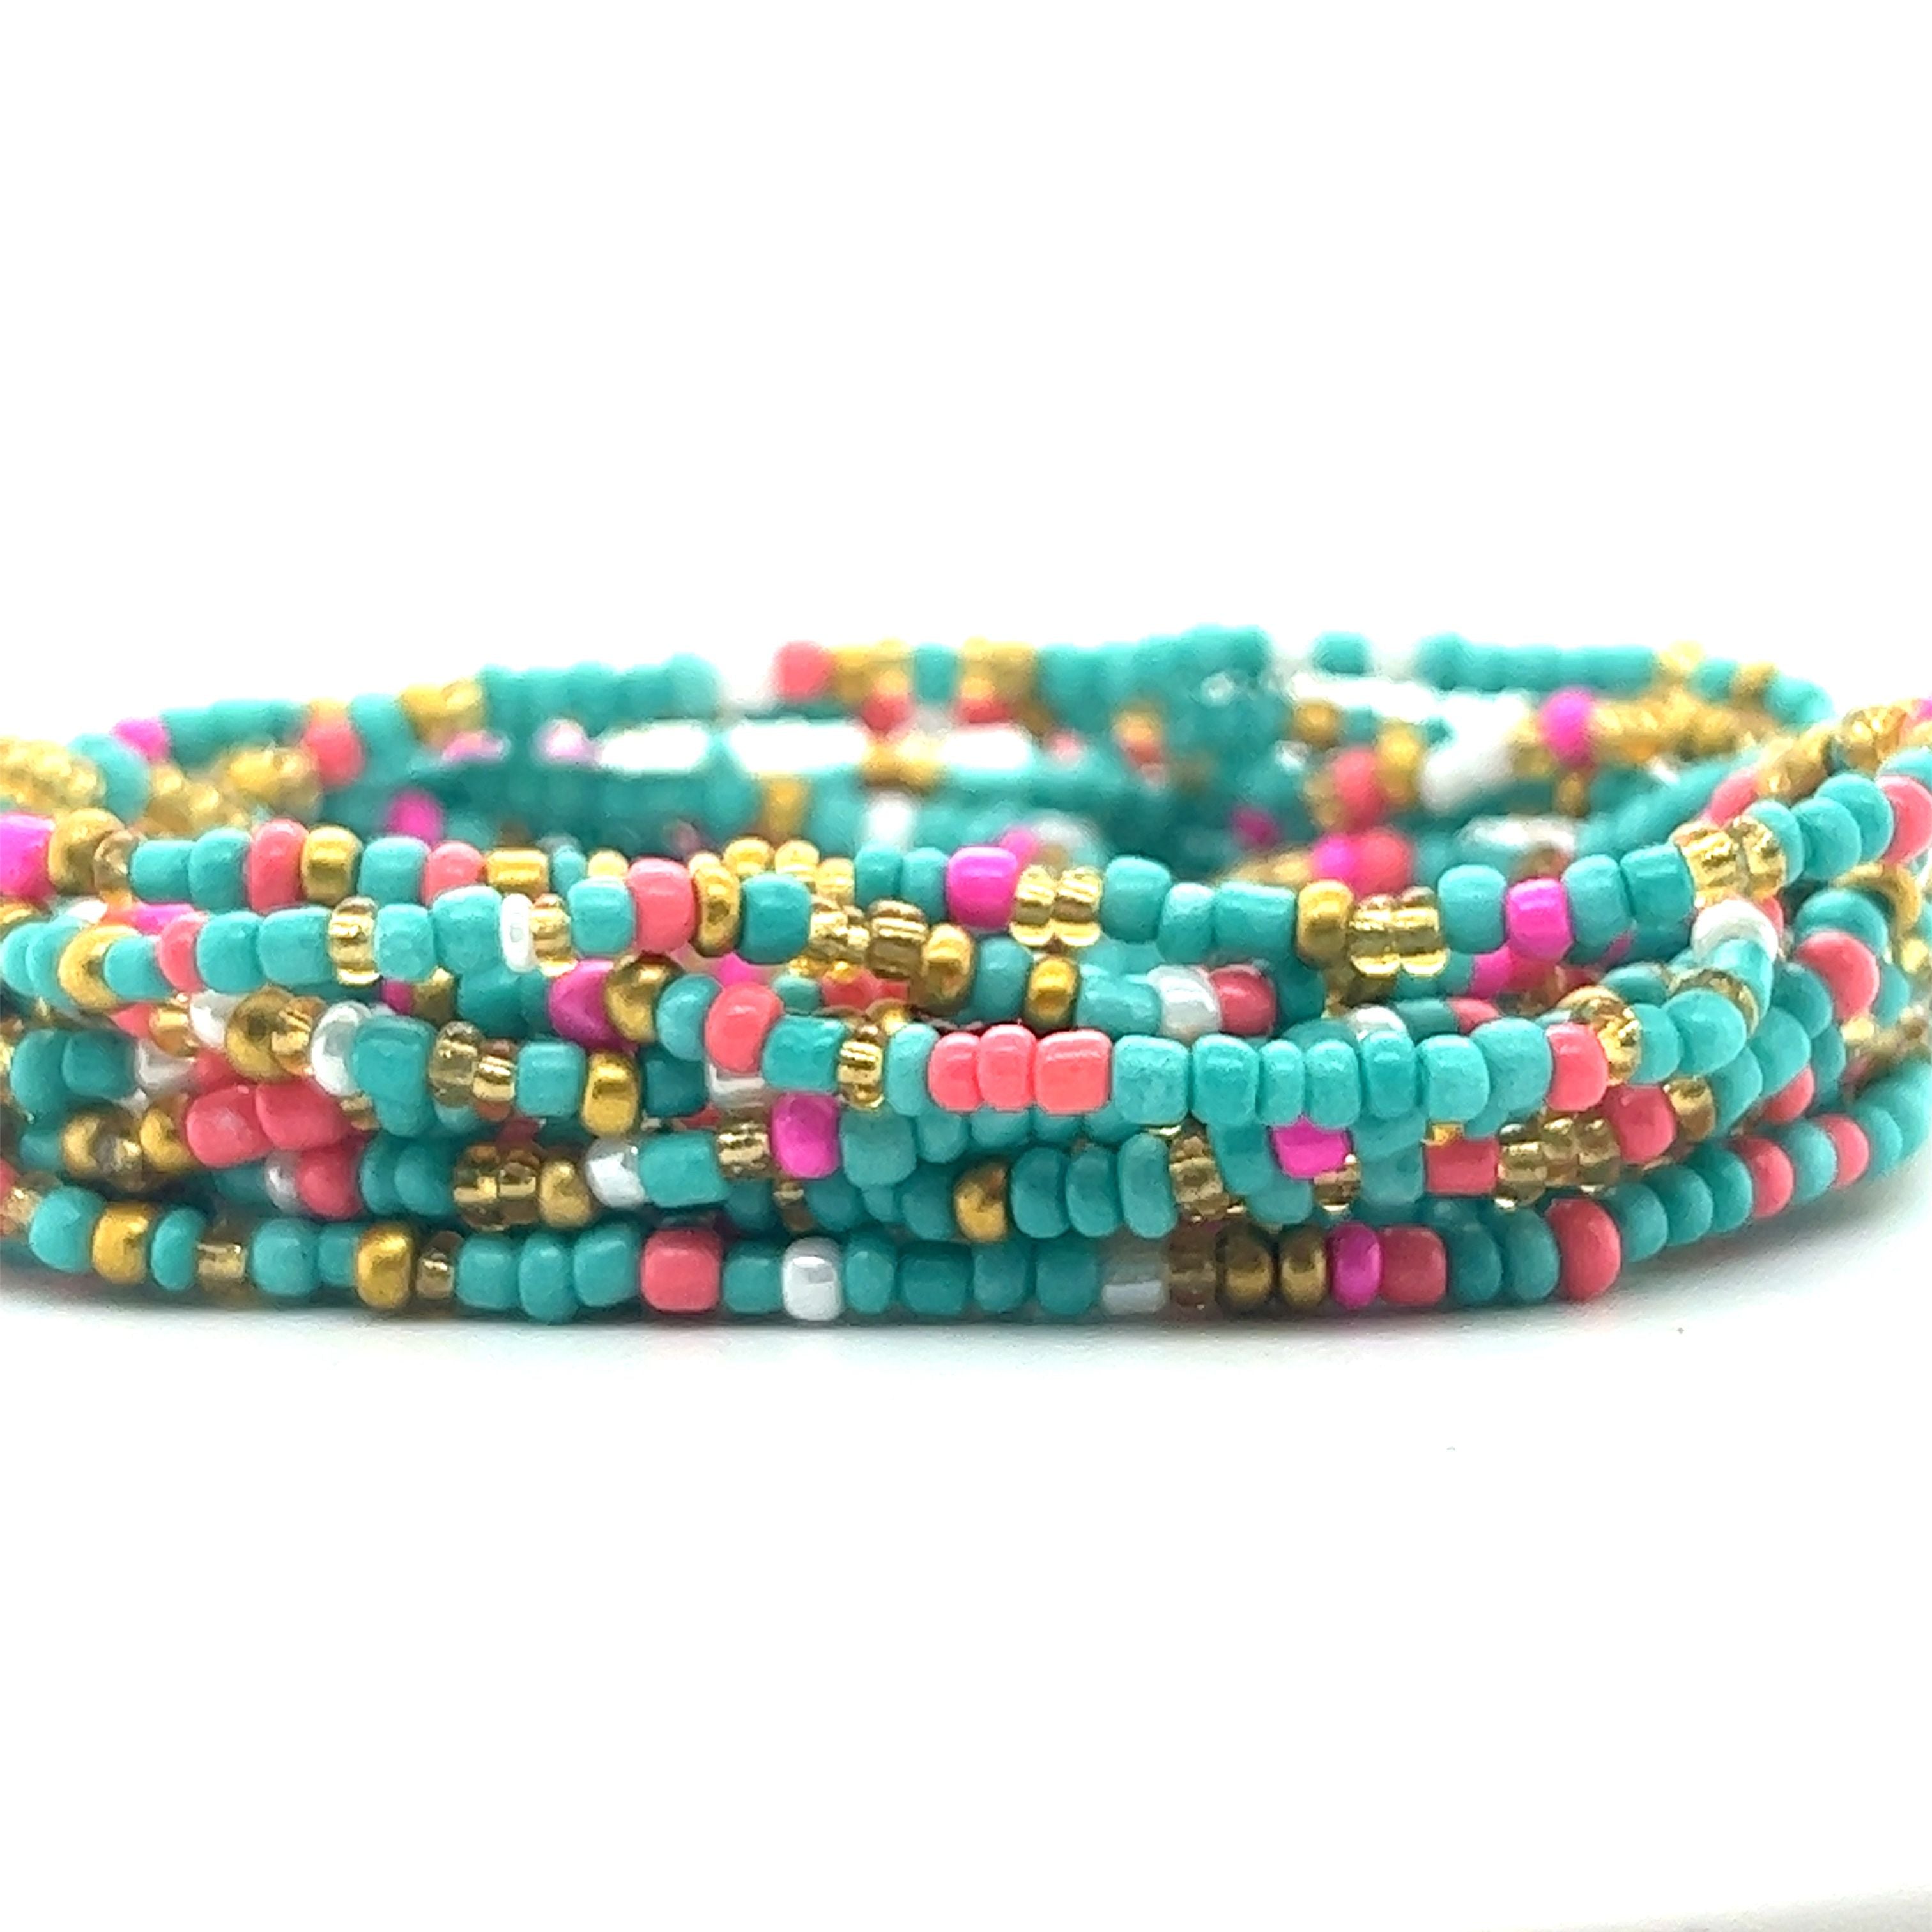 Colourful Summer Beaded Bracelet with seed beads – Dainty Rocks Jewellery